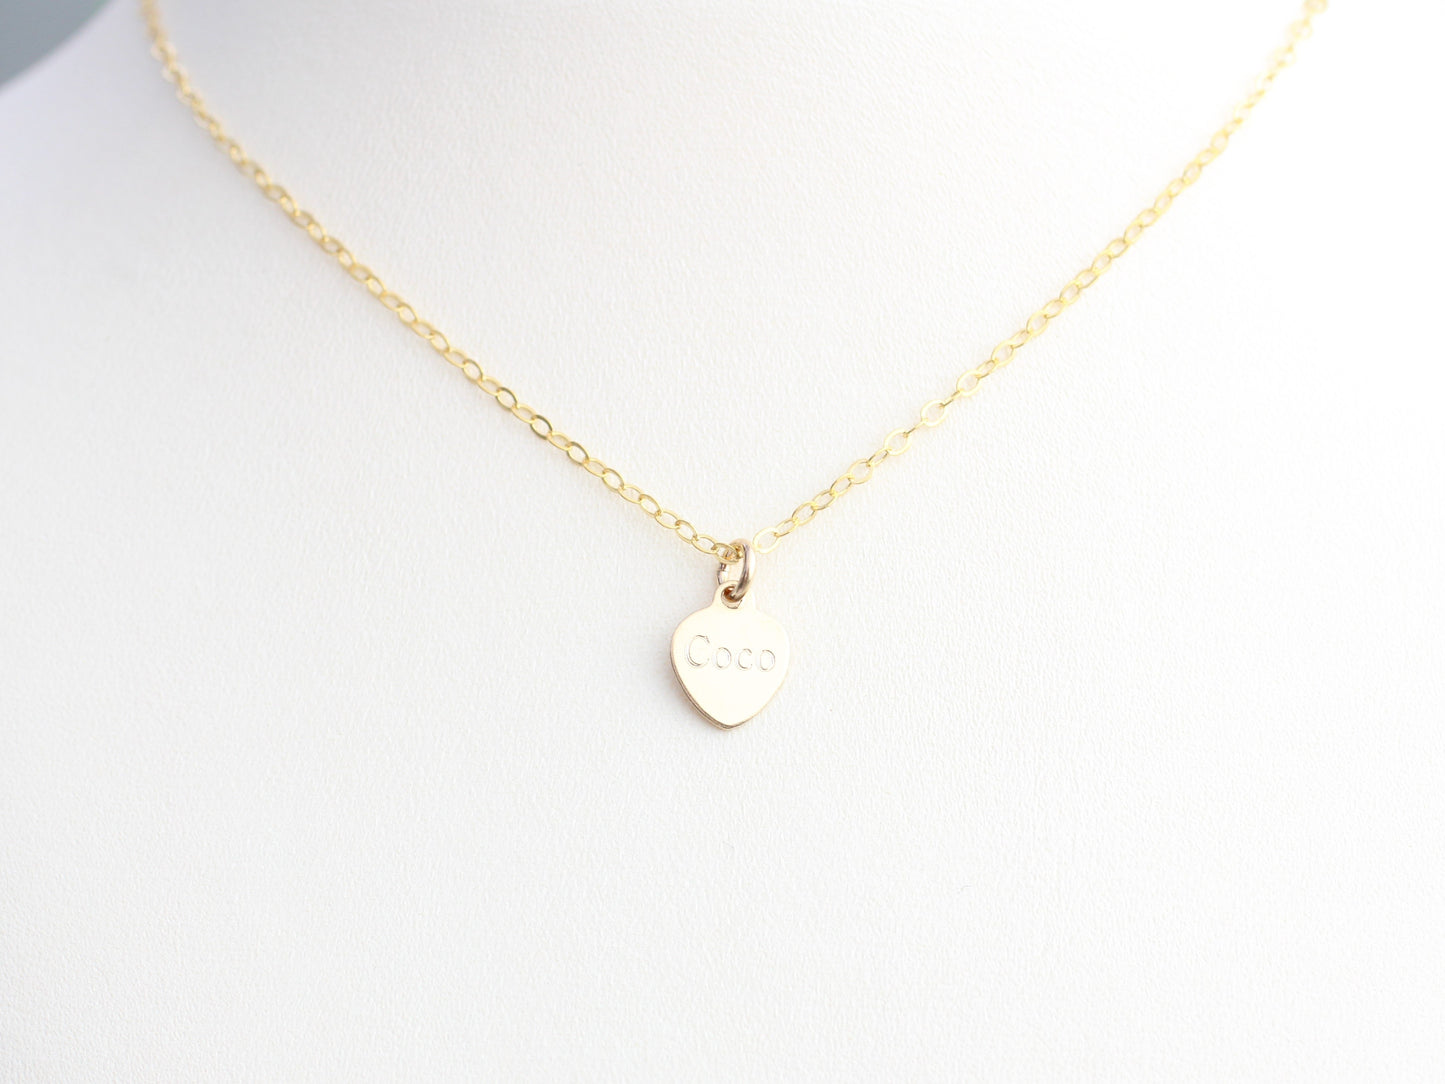 Sweet 16 necklace in gold. Engrave on front and back.